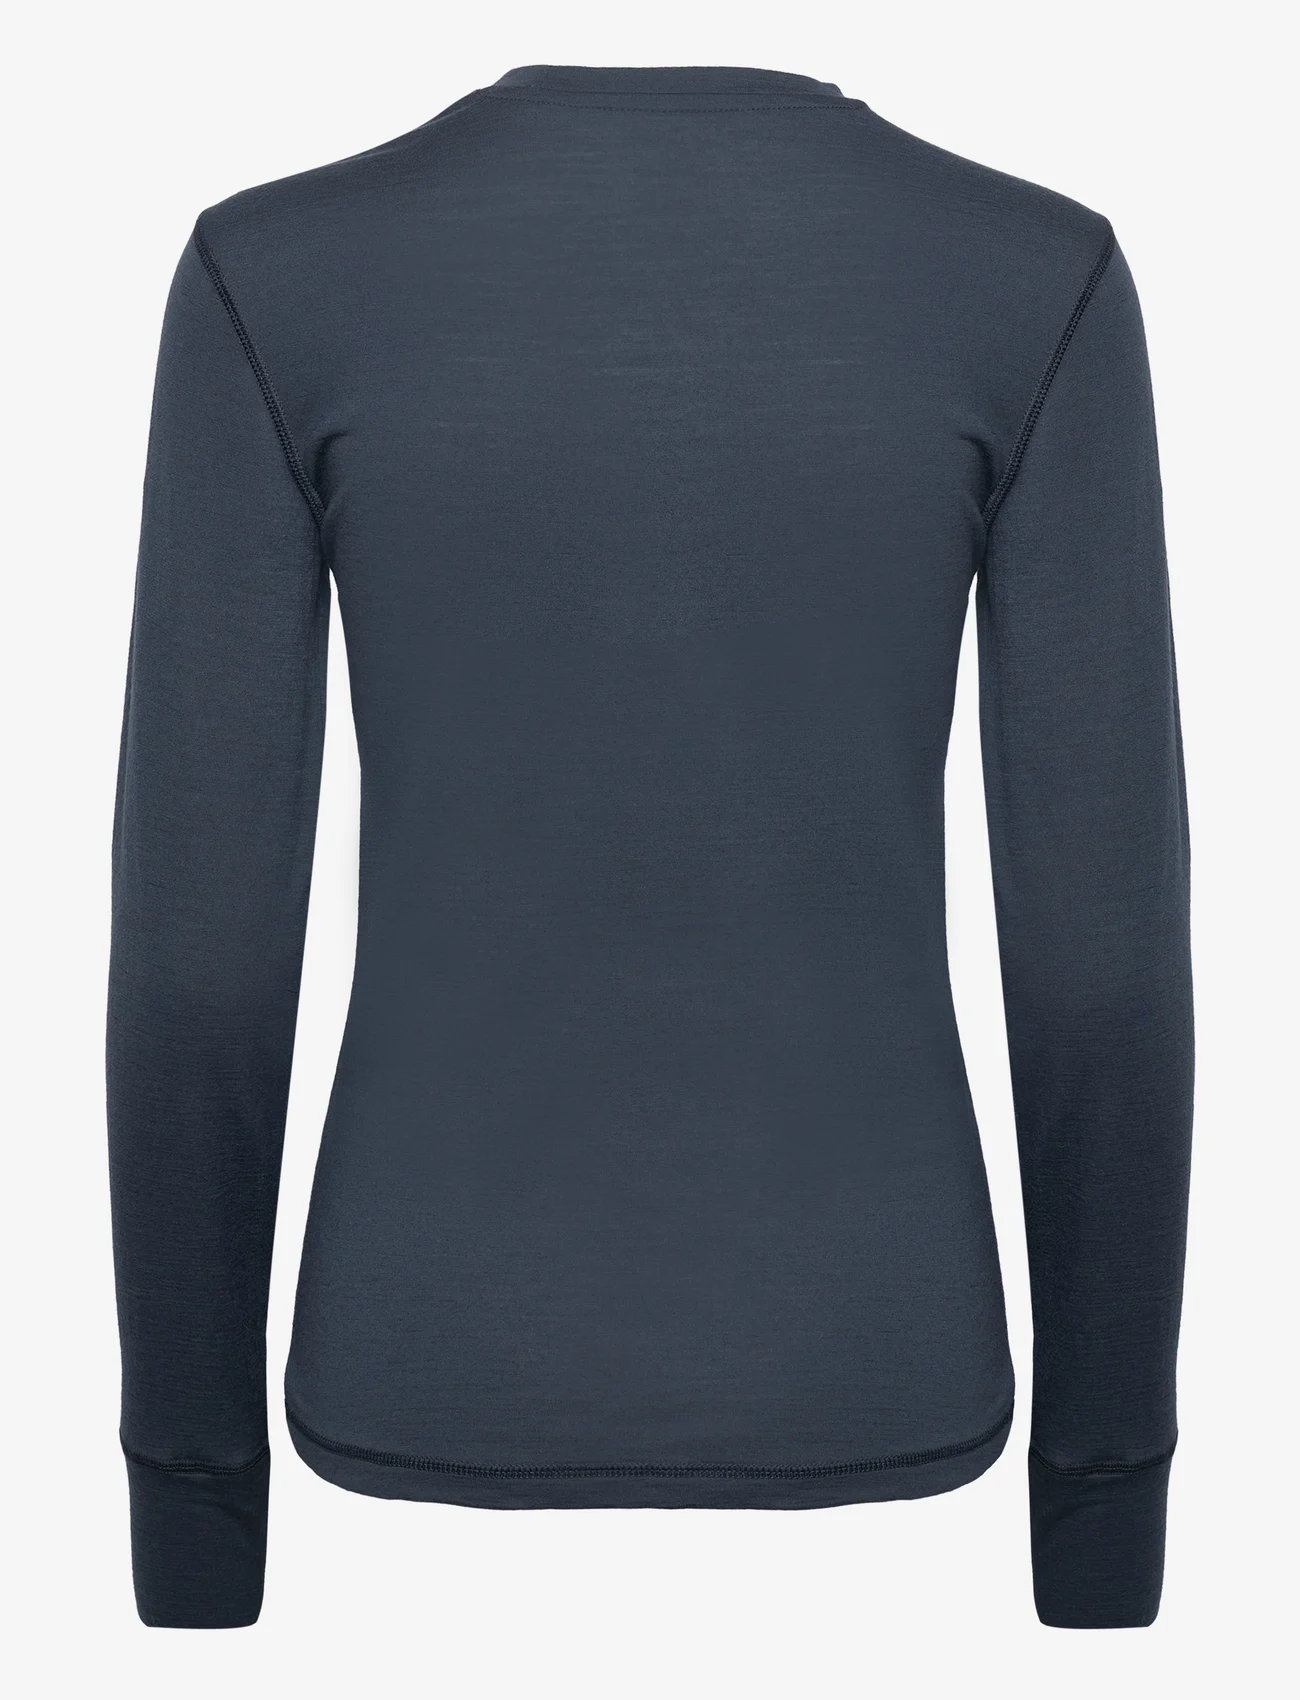 super.natural - W TUNDRA175 LS - longsleeved tops - blueberry - 1